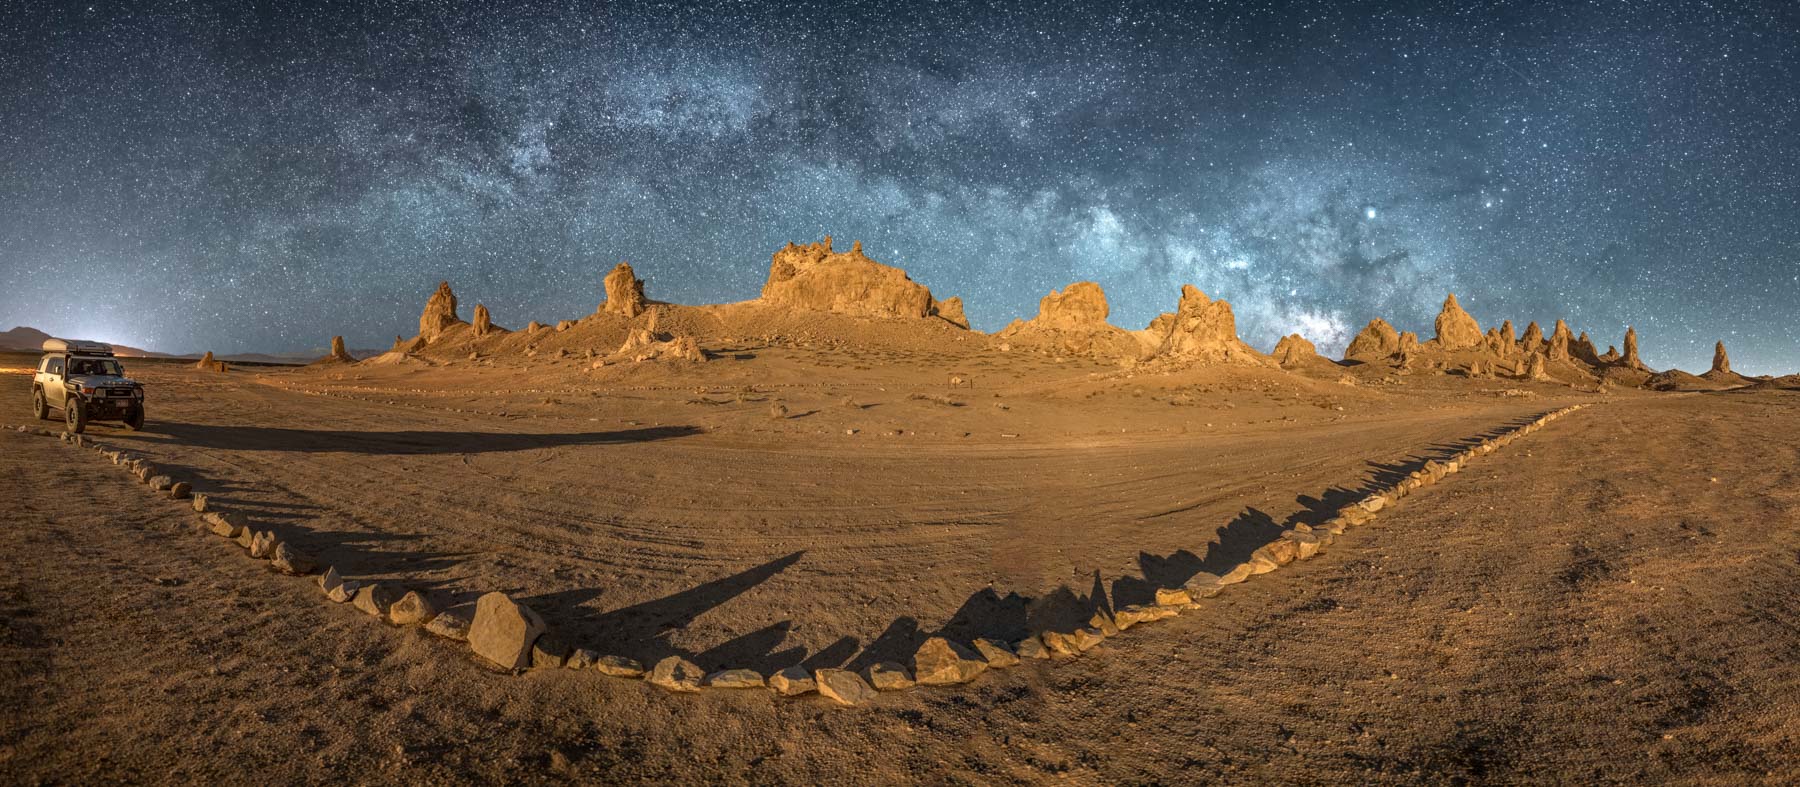 The Milky Way over the Trona Pinnacles